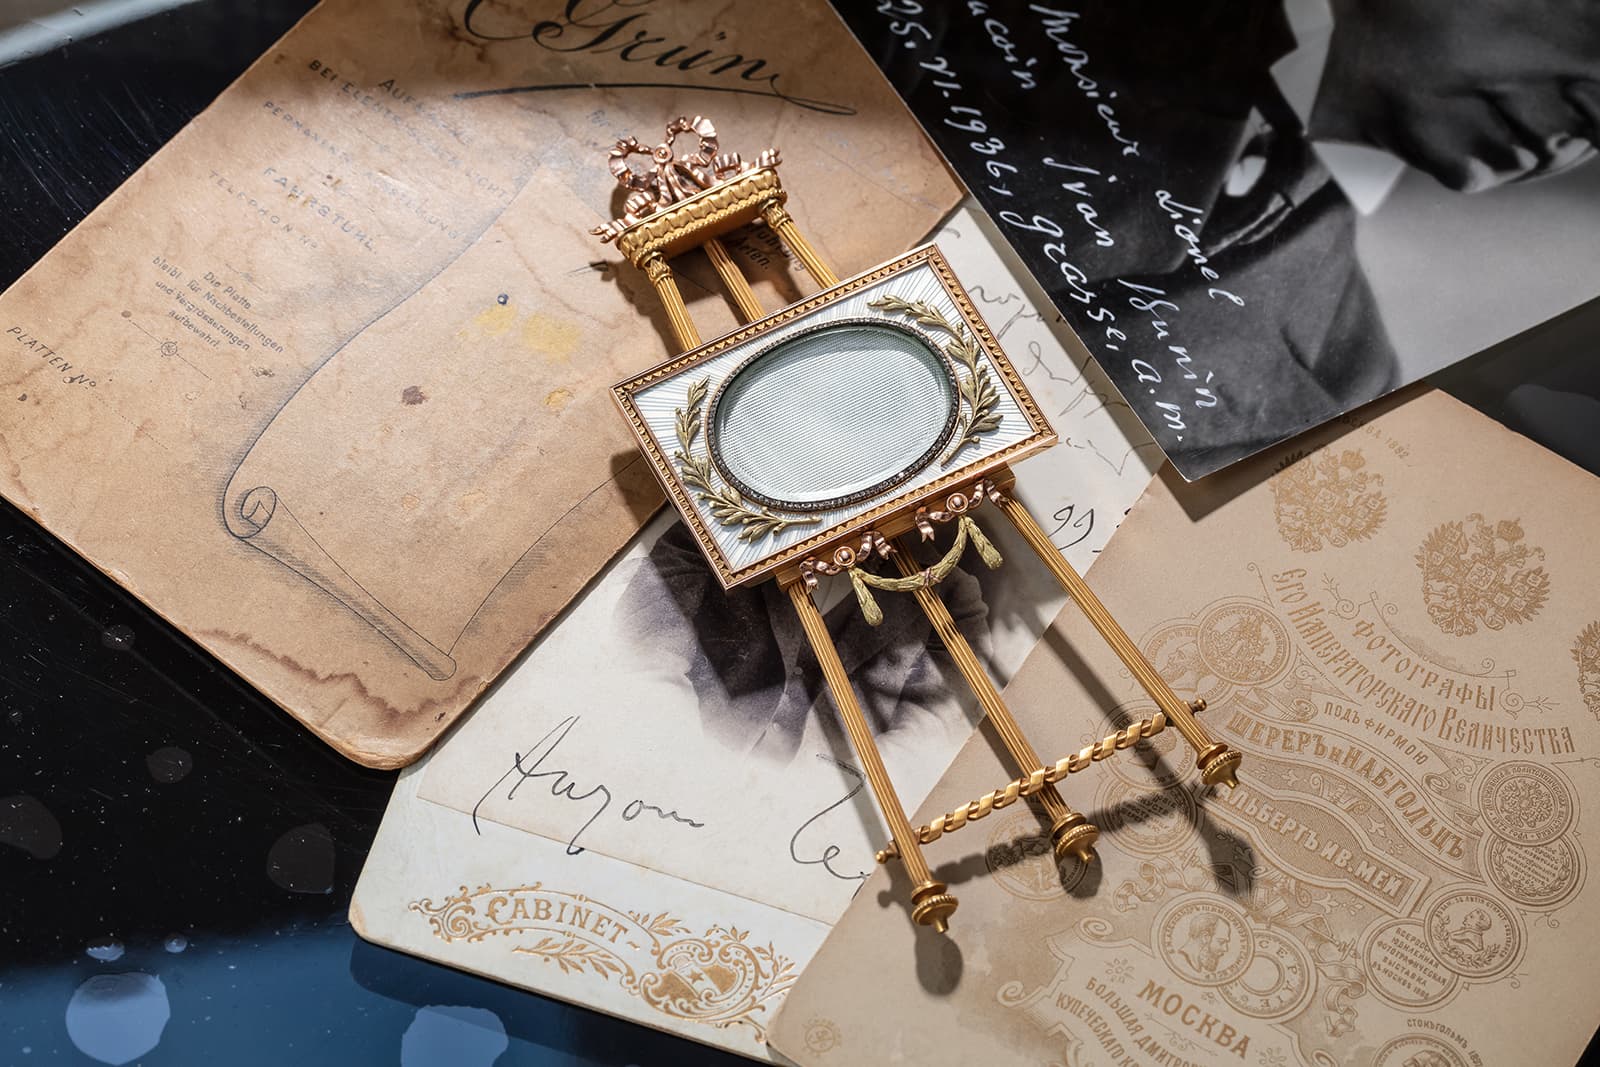 Fabergé photo frame in the form of an easel (circa. 1899-1908) in gold with guilloché enamel and rose-cut diamonds, part of the Harry Woolf collection to be sold by Christie’s London in November 2021